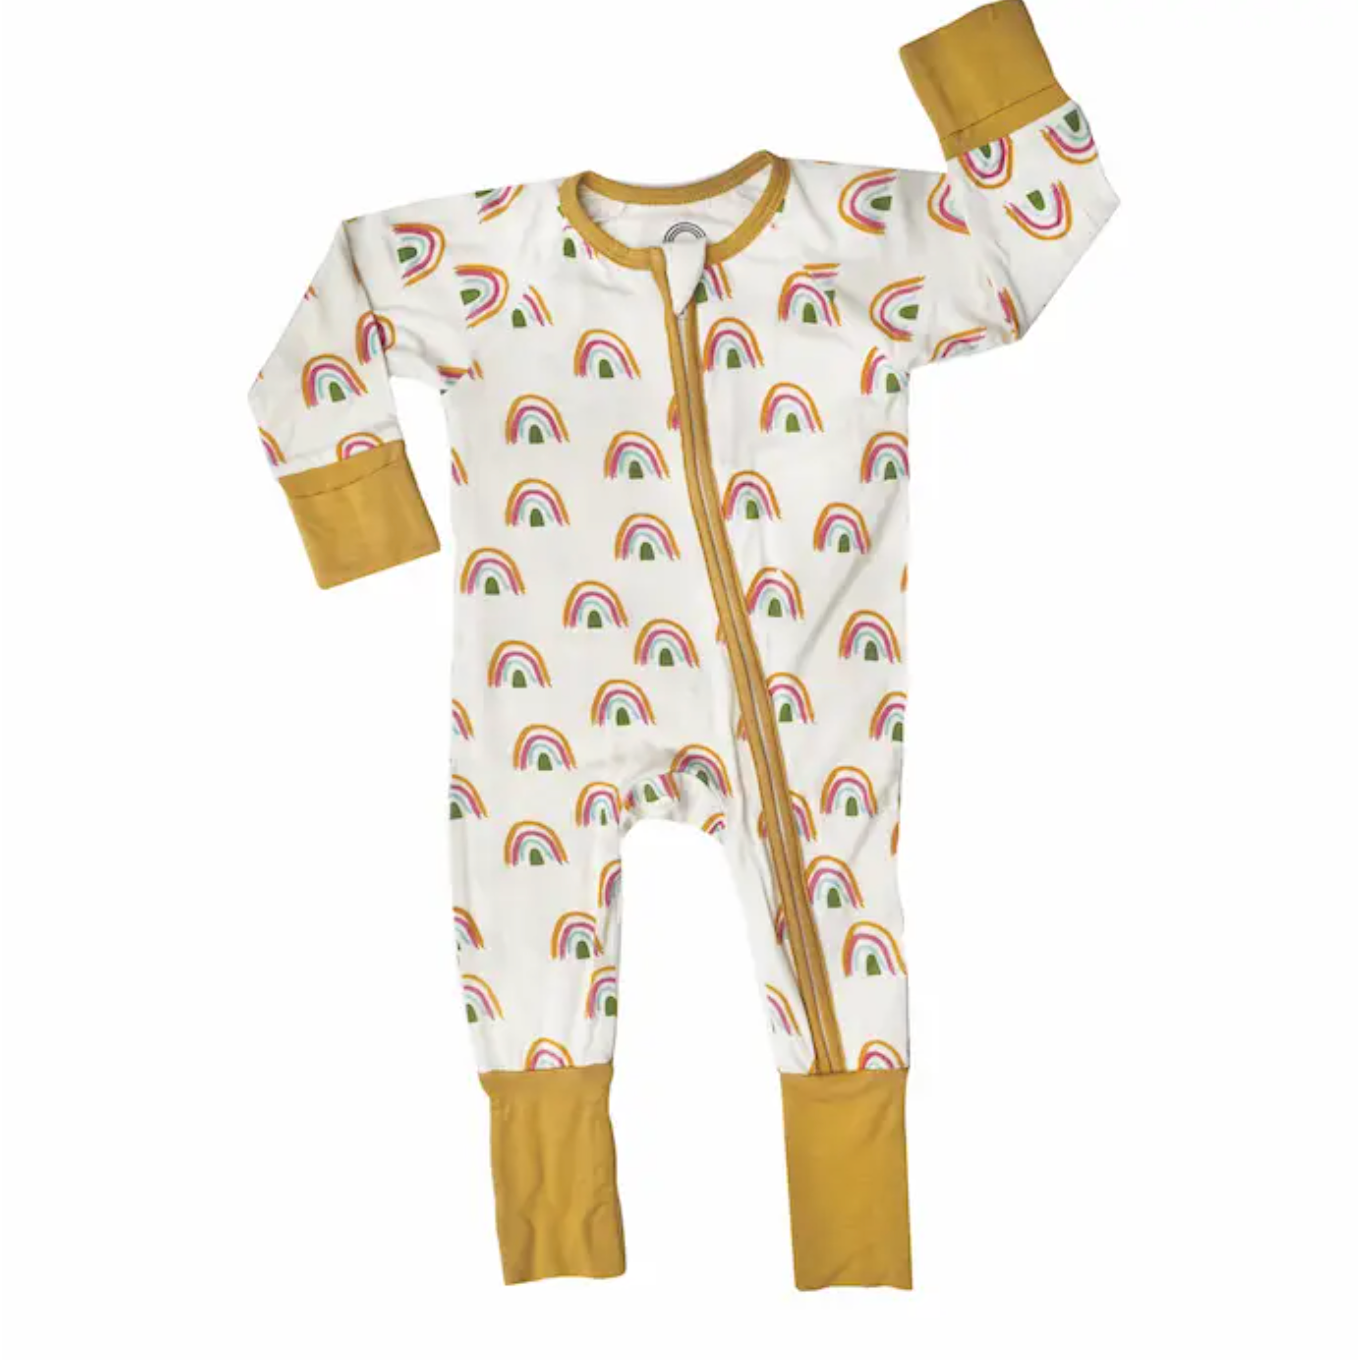 bamboo baby convertible footie pajamas in neutral rainbow